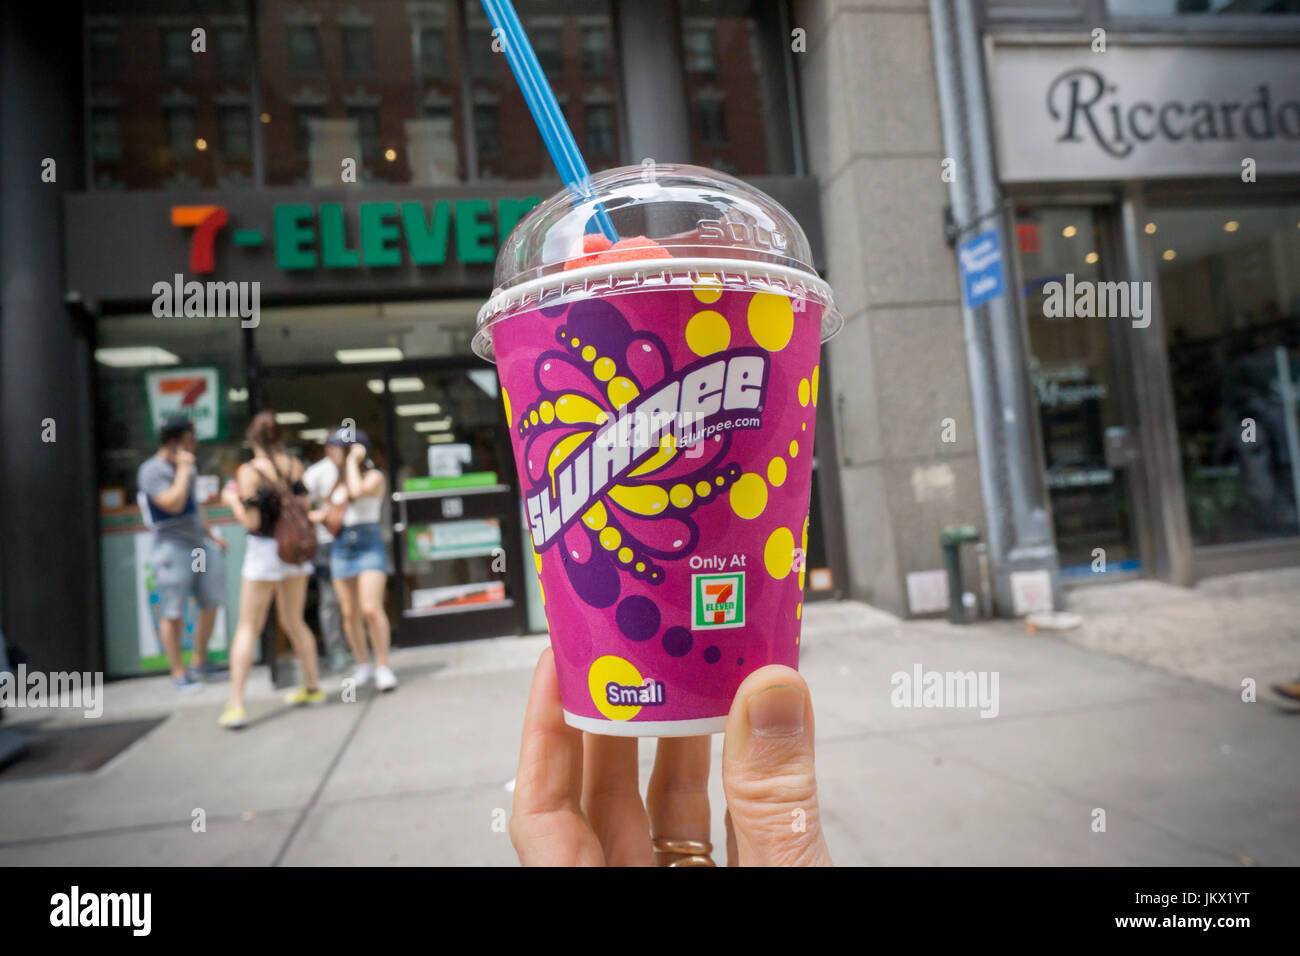 A Slurpee lover displays her free drink outside a 7-Eleven store in New York on Tuesday, July 11, 2017 (7-11, get it?), Free Slurpee Day! This year the chain is celebrating it's 90th birthday. The popular icy, slushy, syrupy drinks are available in regular and diet flavors, in combinations, and the stores have stocked up with extra barrels of syrup to meet the expected demand. According to the meticulous figures kept by 7-Eleven they sell an average of 14 million Slurpees a month and over 150 million Slurpees a year.  (© Richard B. Levine) Stock Photo